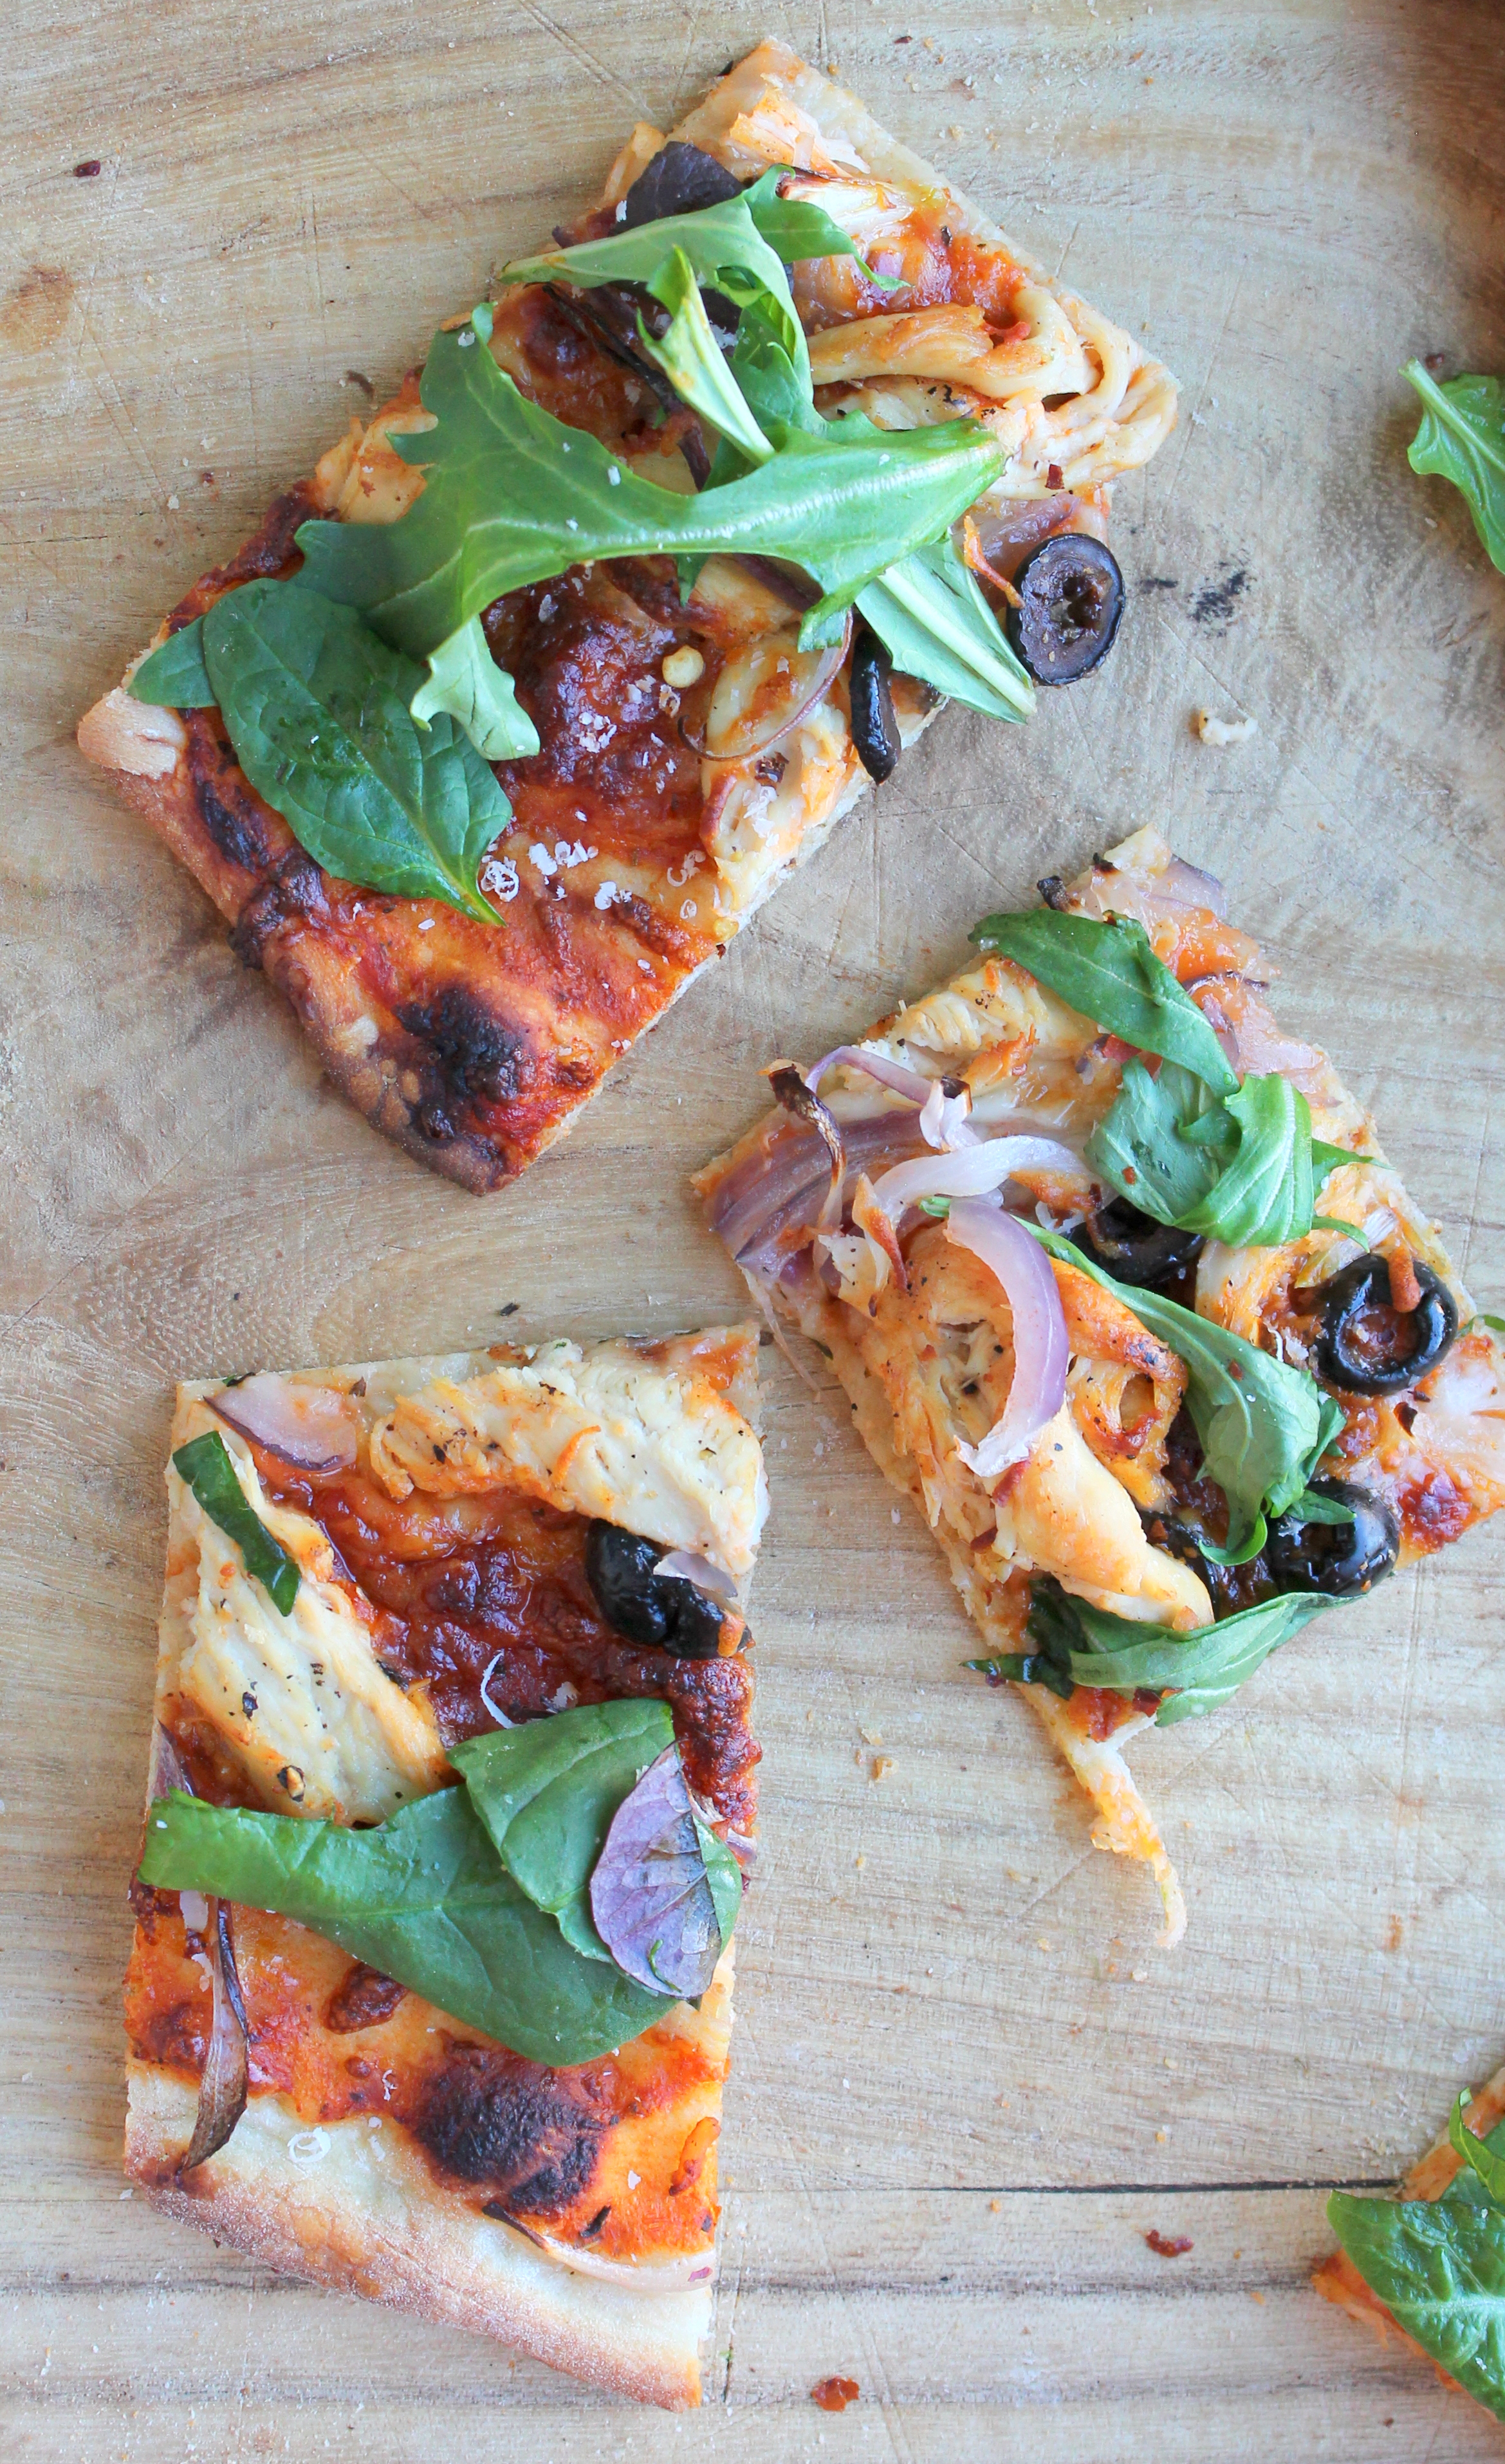 Easy Thin Crust Pizza is a full proof recipe that requires less than an hour to rise. The dough can be pre-made and you can enjoy it with your favorite toppings even on a weeknight.